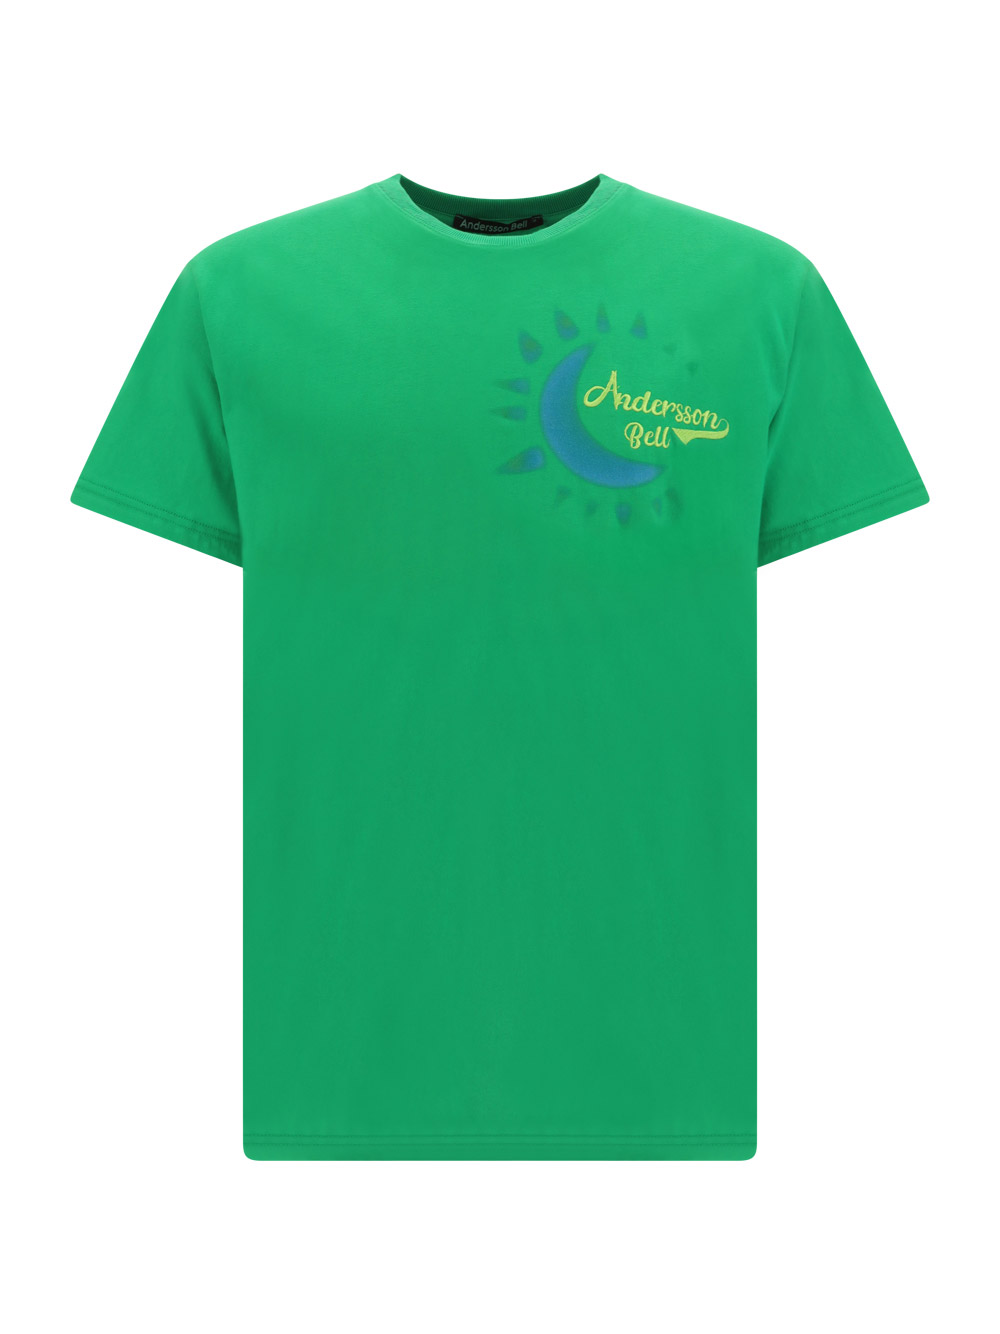 ANDERSSON BELL T-SHIRT,ATB901U_GREEN